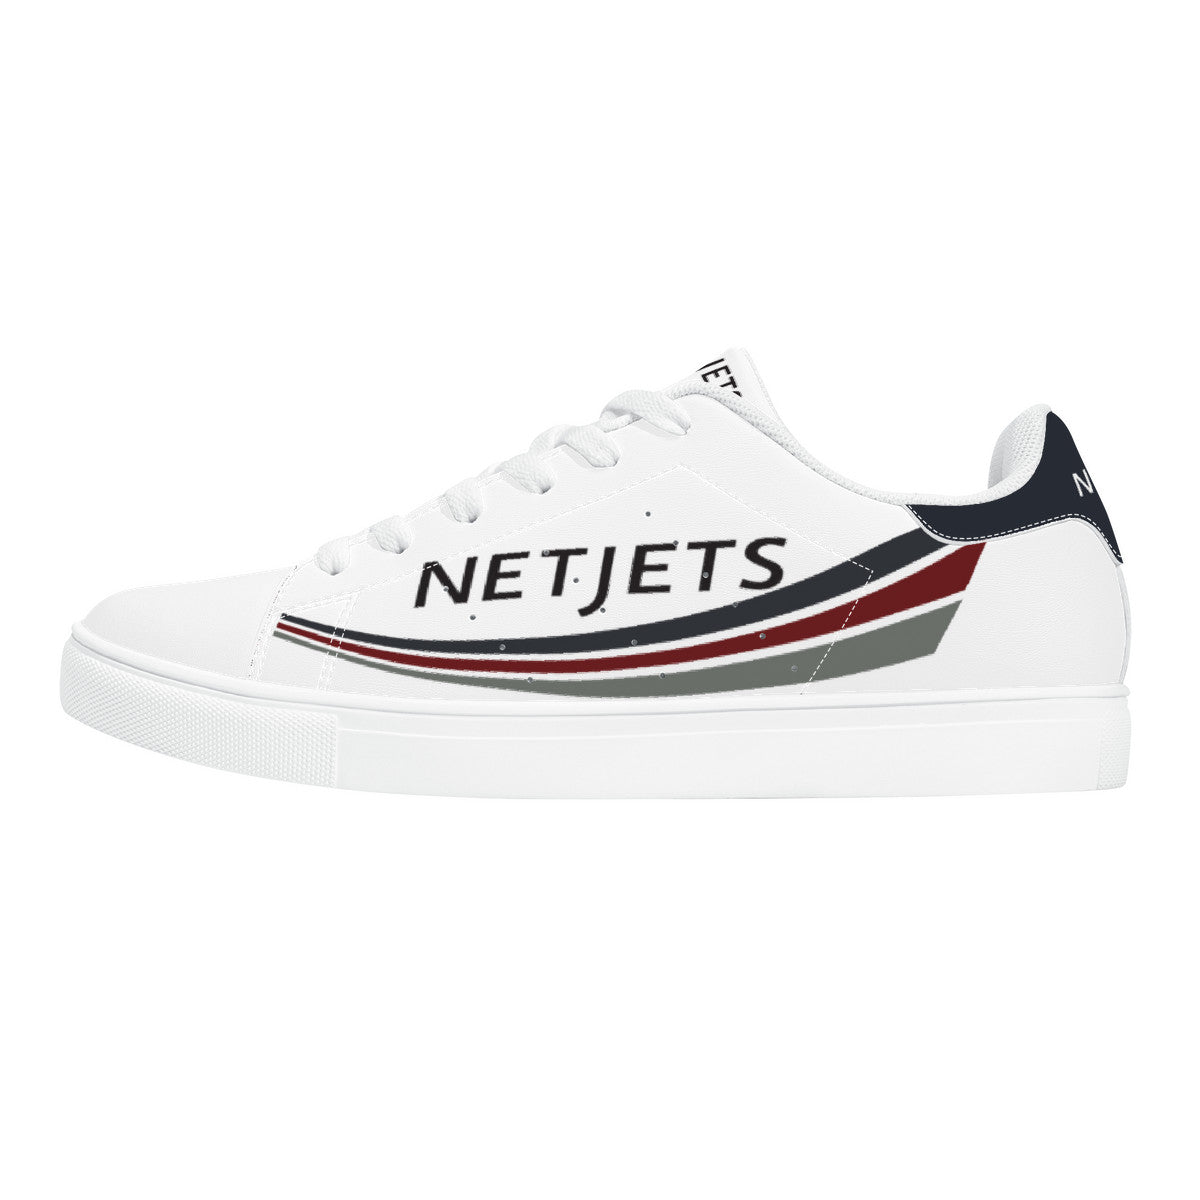 Net Jets V3 | Customized Low-Top Synthetic Leather Sneakers - White - Shoe Zero